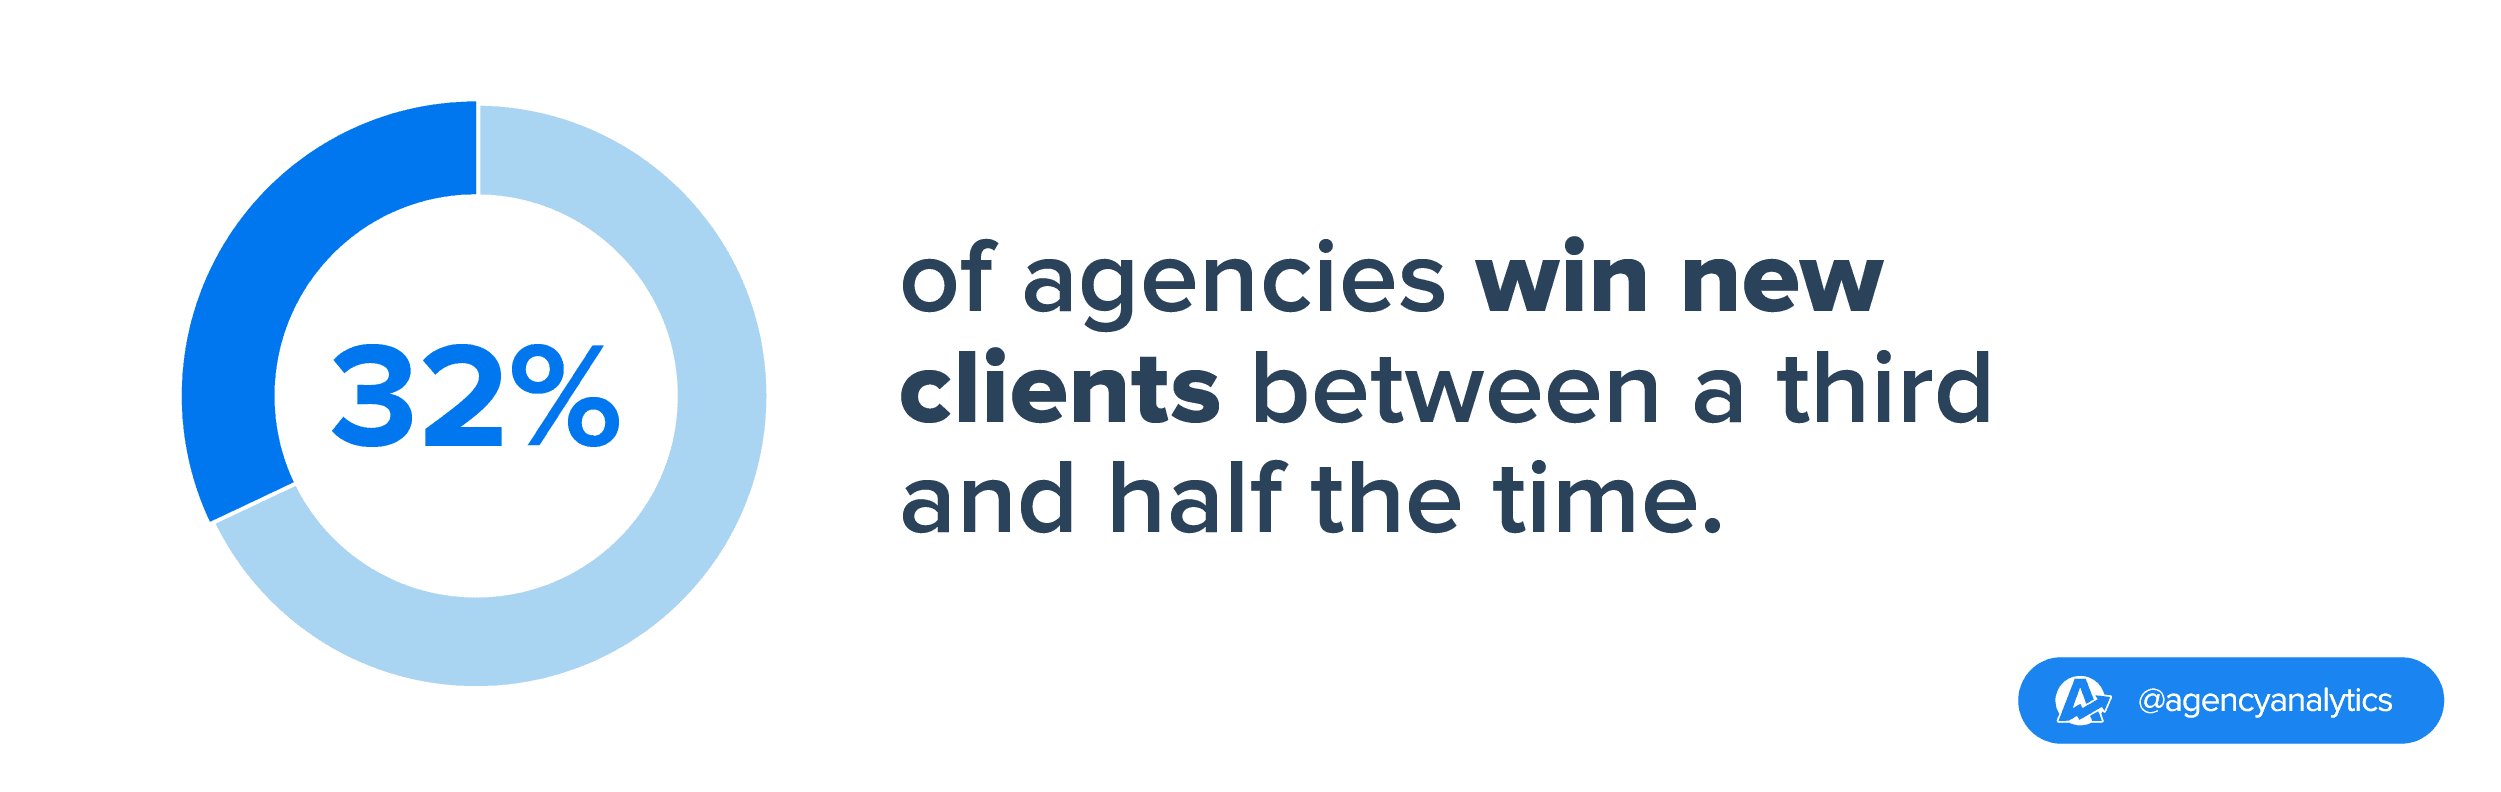 Of the agencies surveyed 32% said they win sales pitches 31-50% of the time